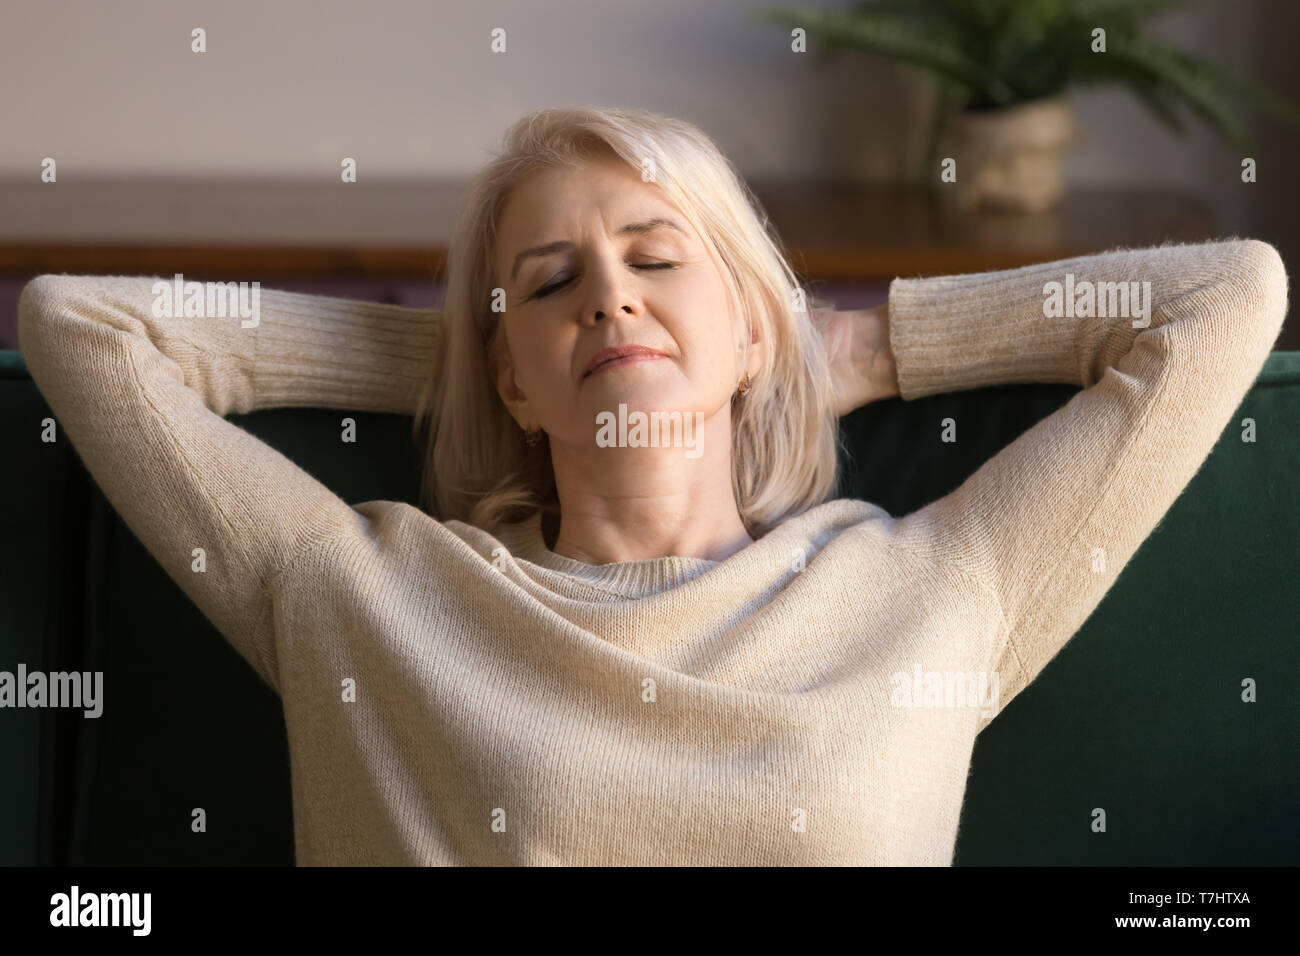 Calm middle aged woman relaxing enjoying weekend on comfortable sofa Stock Photo